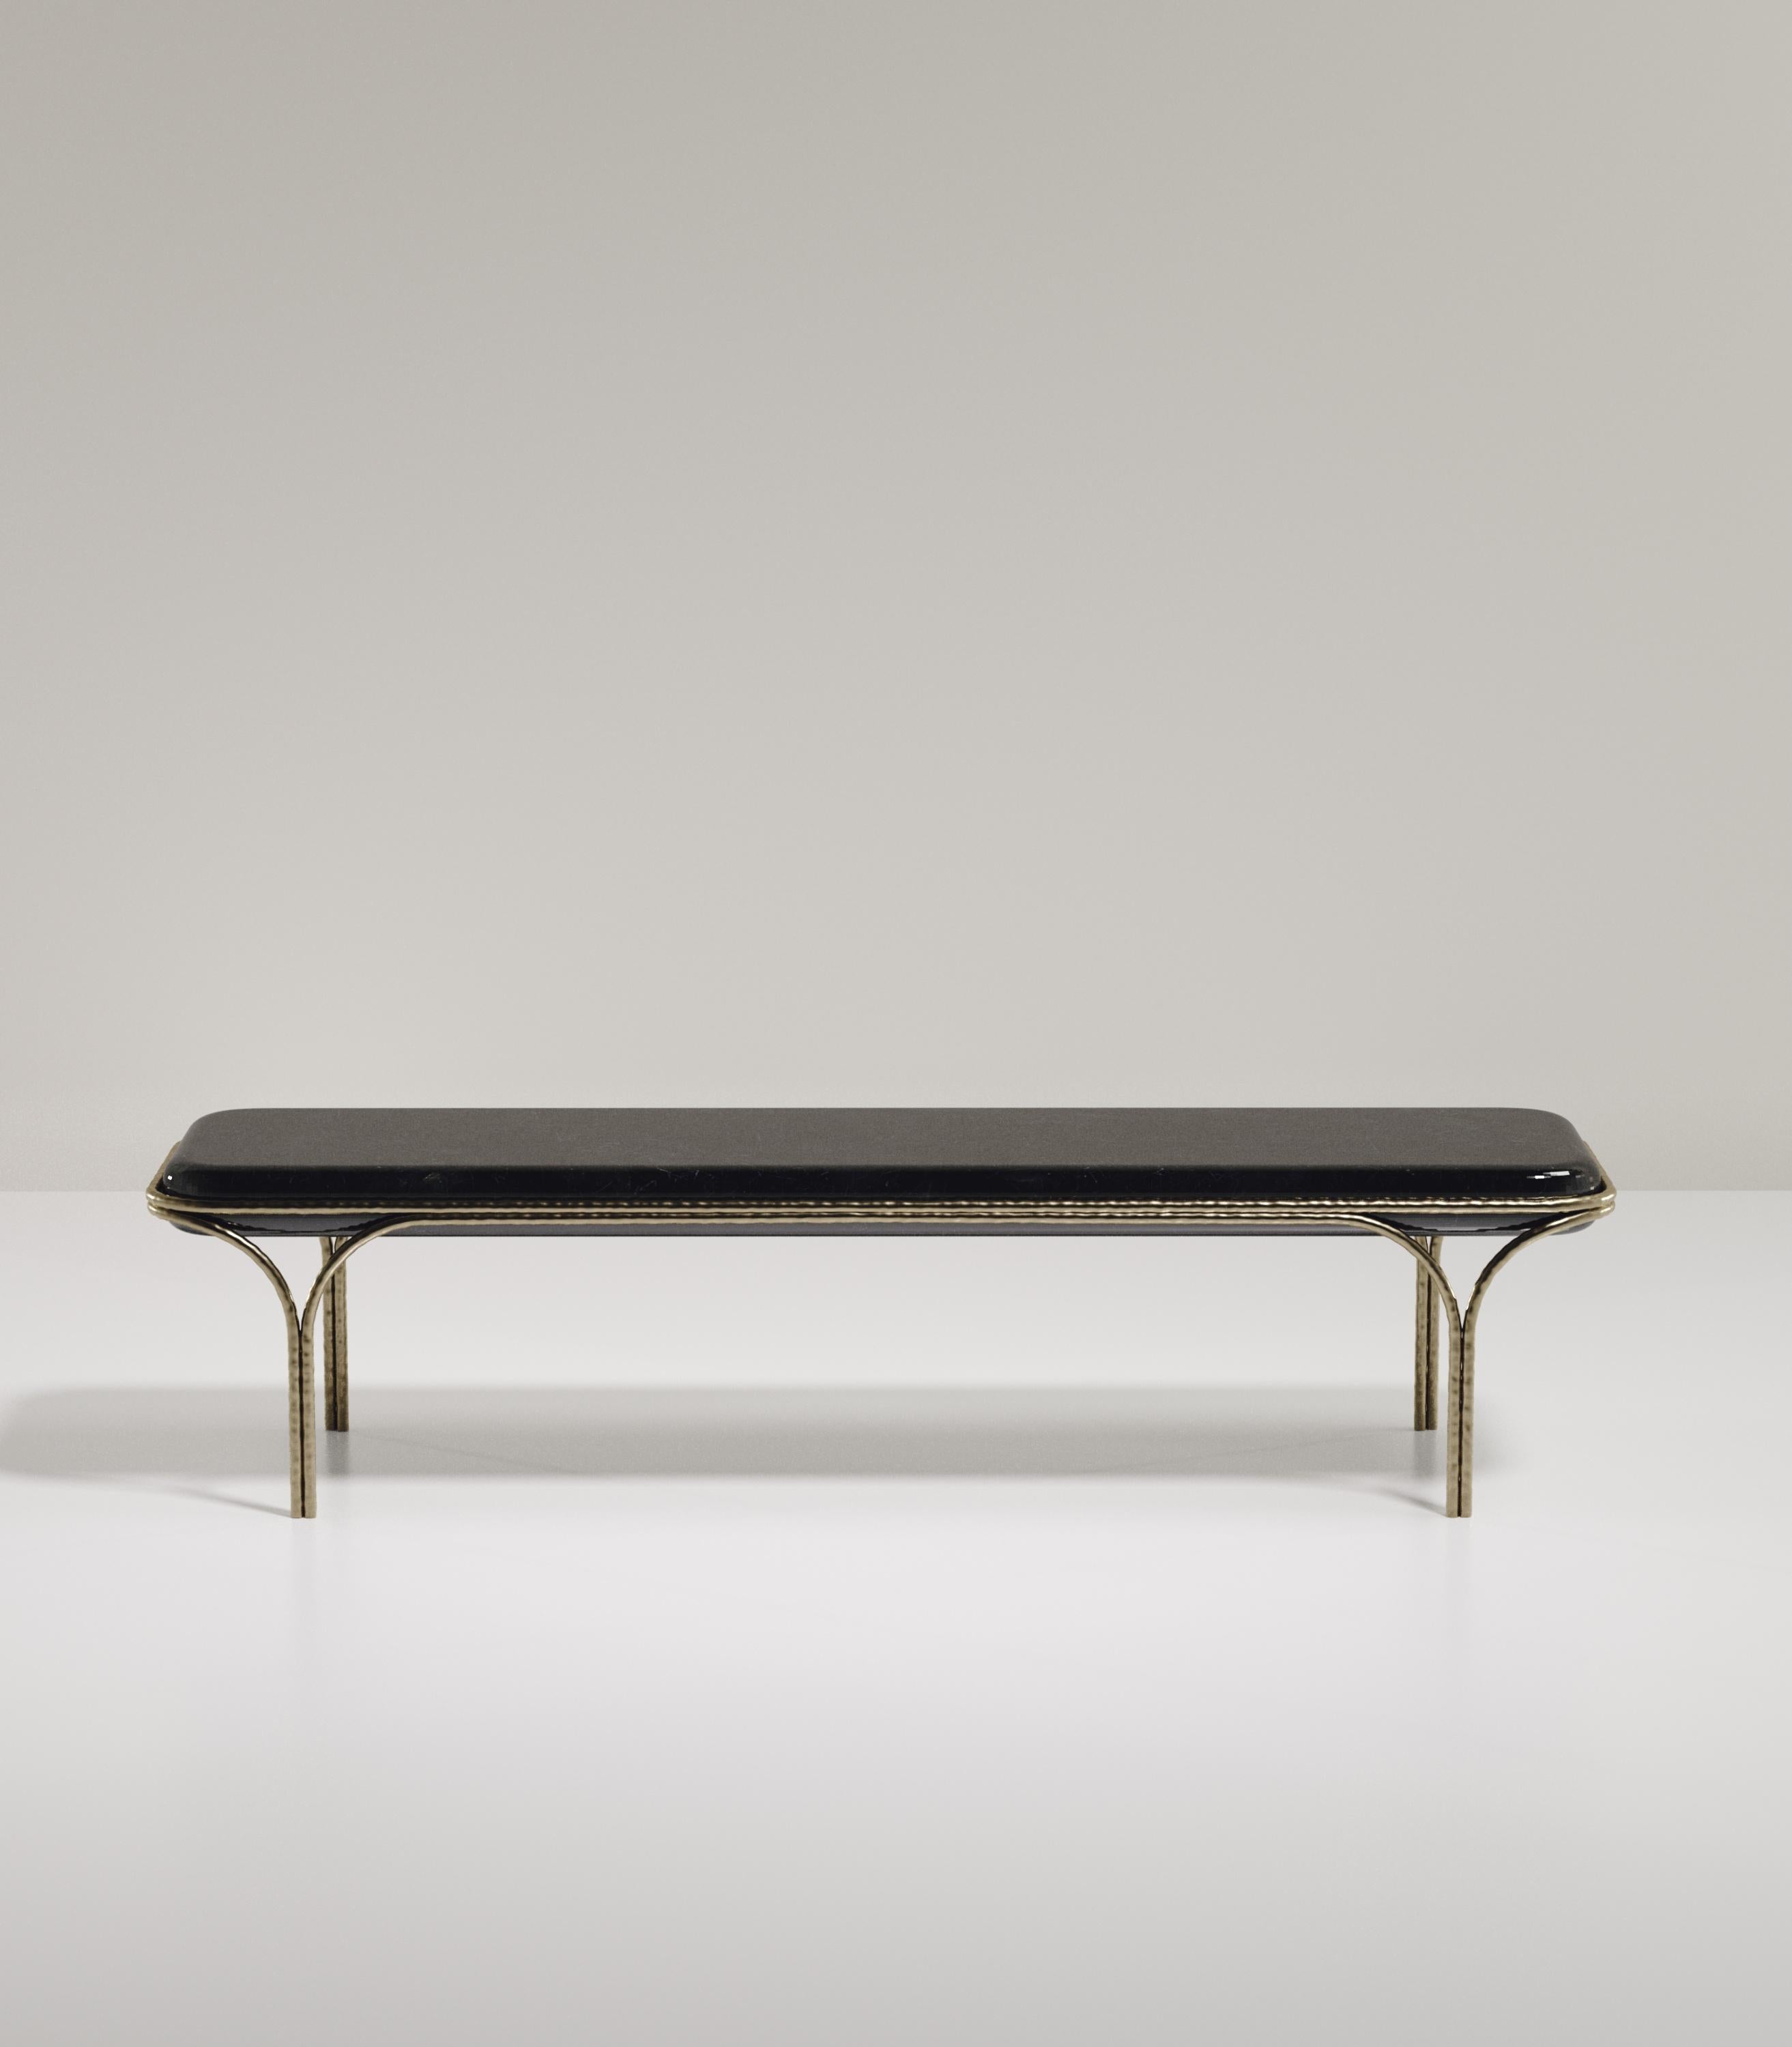 The Arianne bench by R&Y Augousti is an elegant piece for any space. The black pen shell inlaid seat, with curved edges, sits on an organic bronze-patina frame. The intricate frame and legs have a 